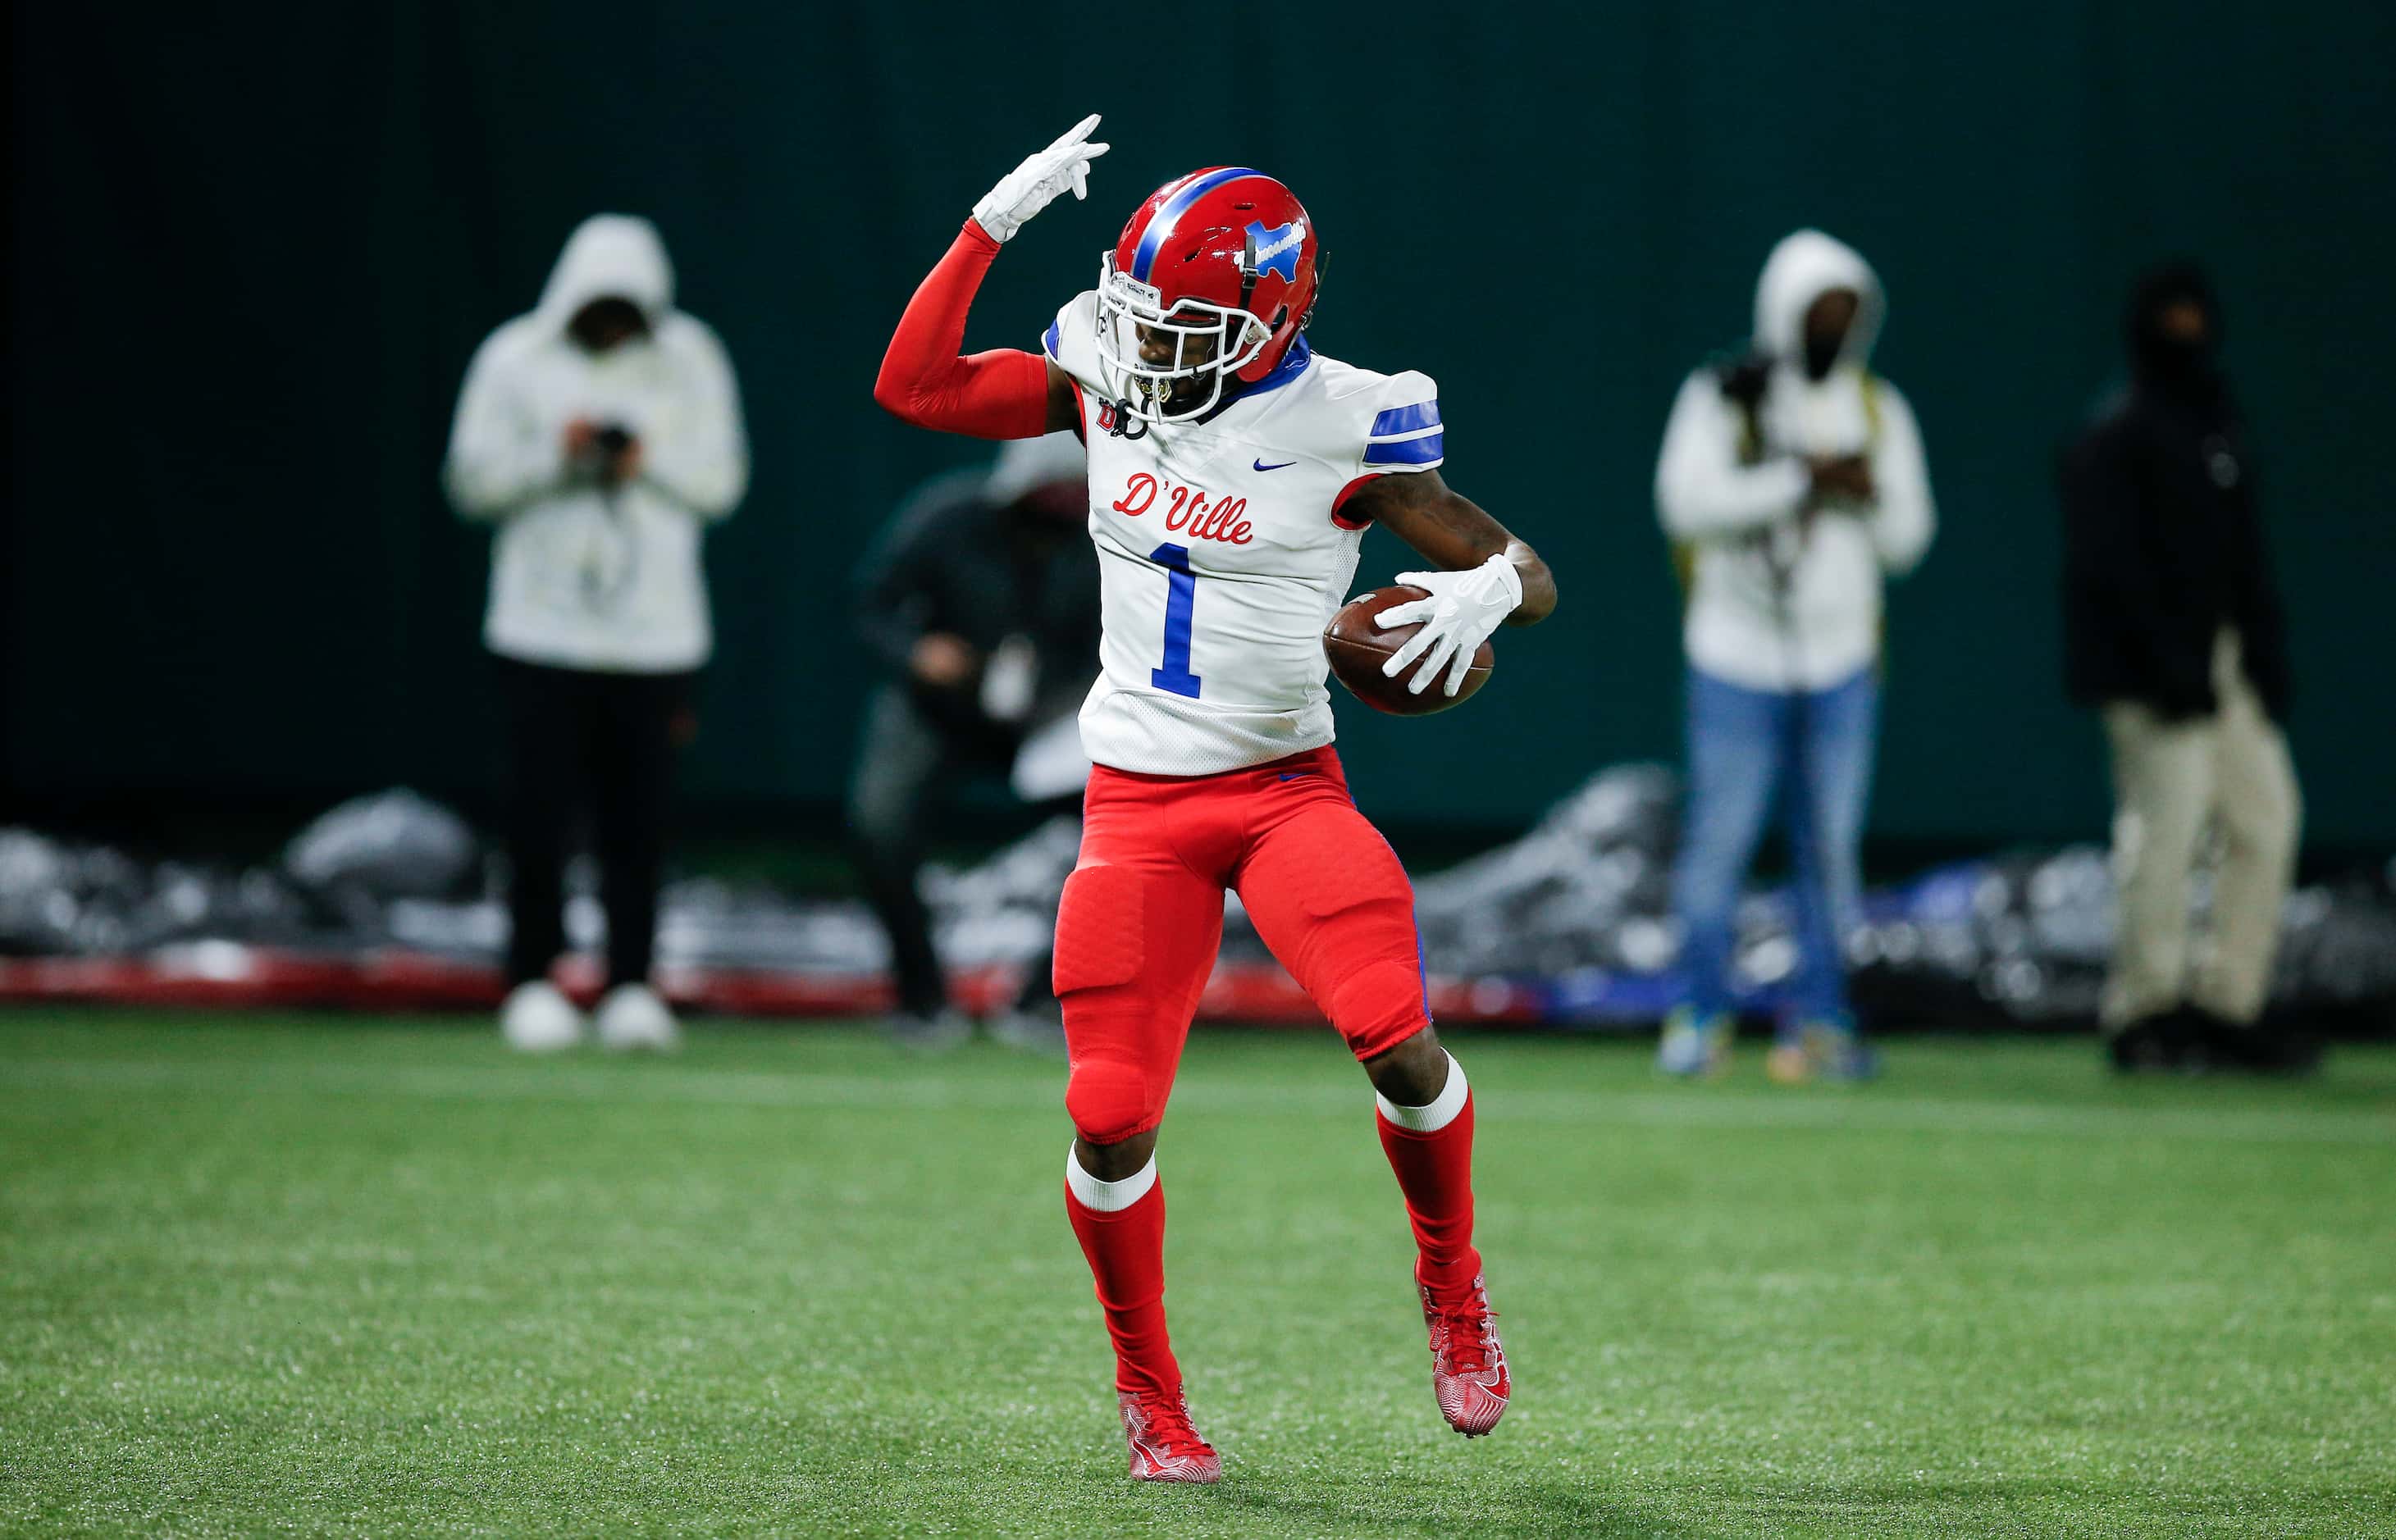 Duncanville senior running back Chris Hicks celebrates a touchdown during the first half of...